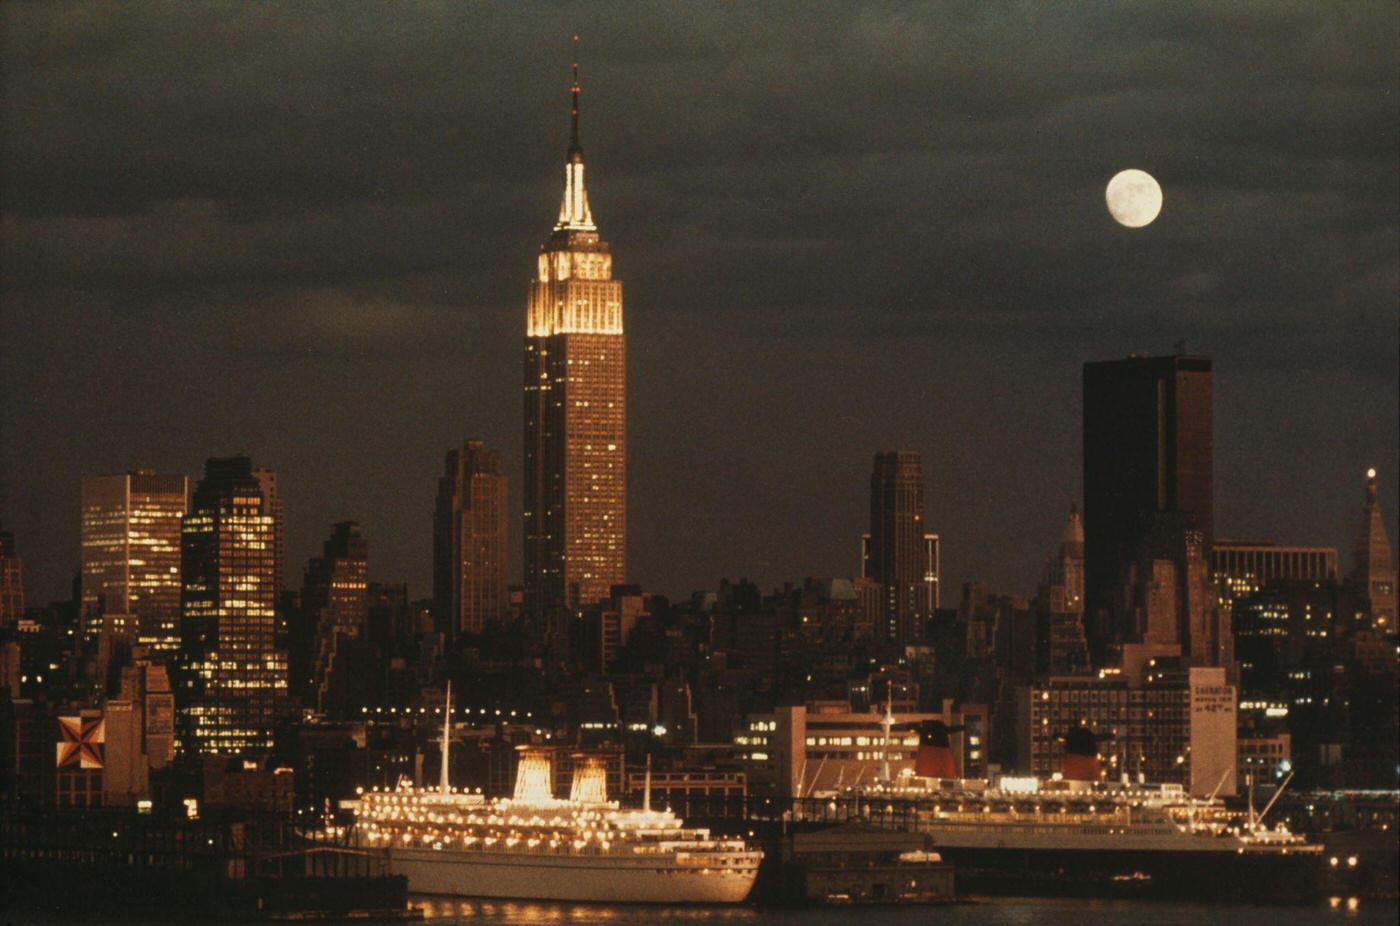 Night View Of The Empire State Building, Ships In New York Harbor, And Skyline In Manhattan, 1974.